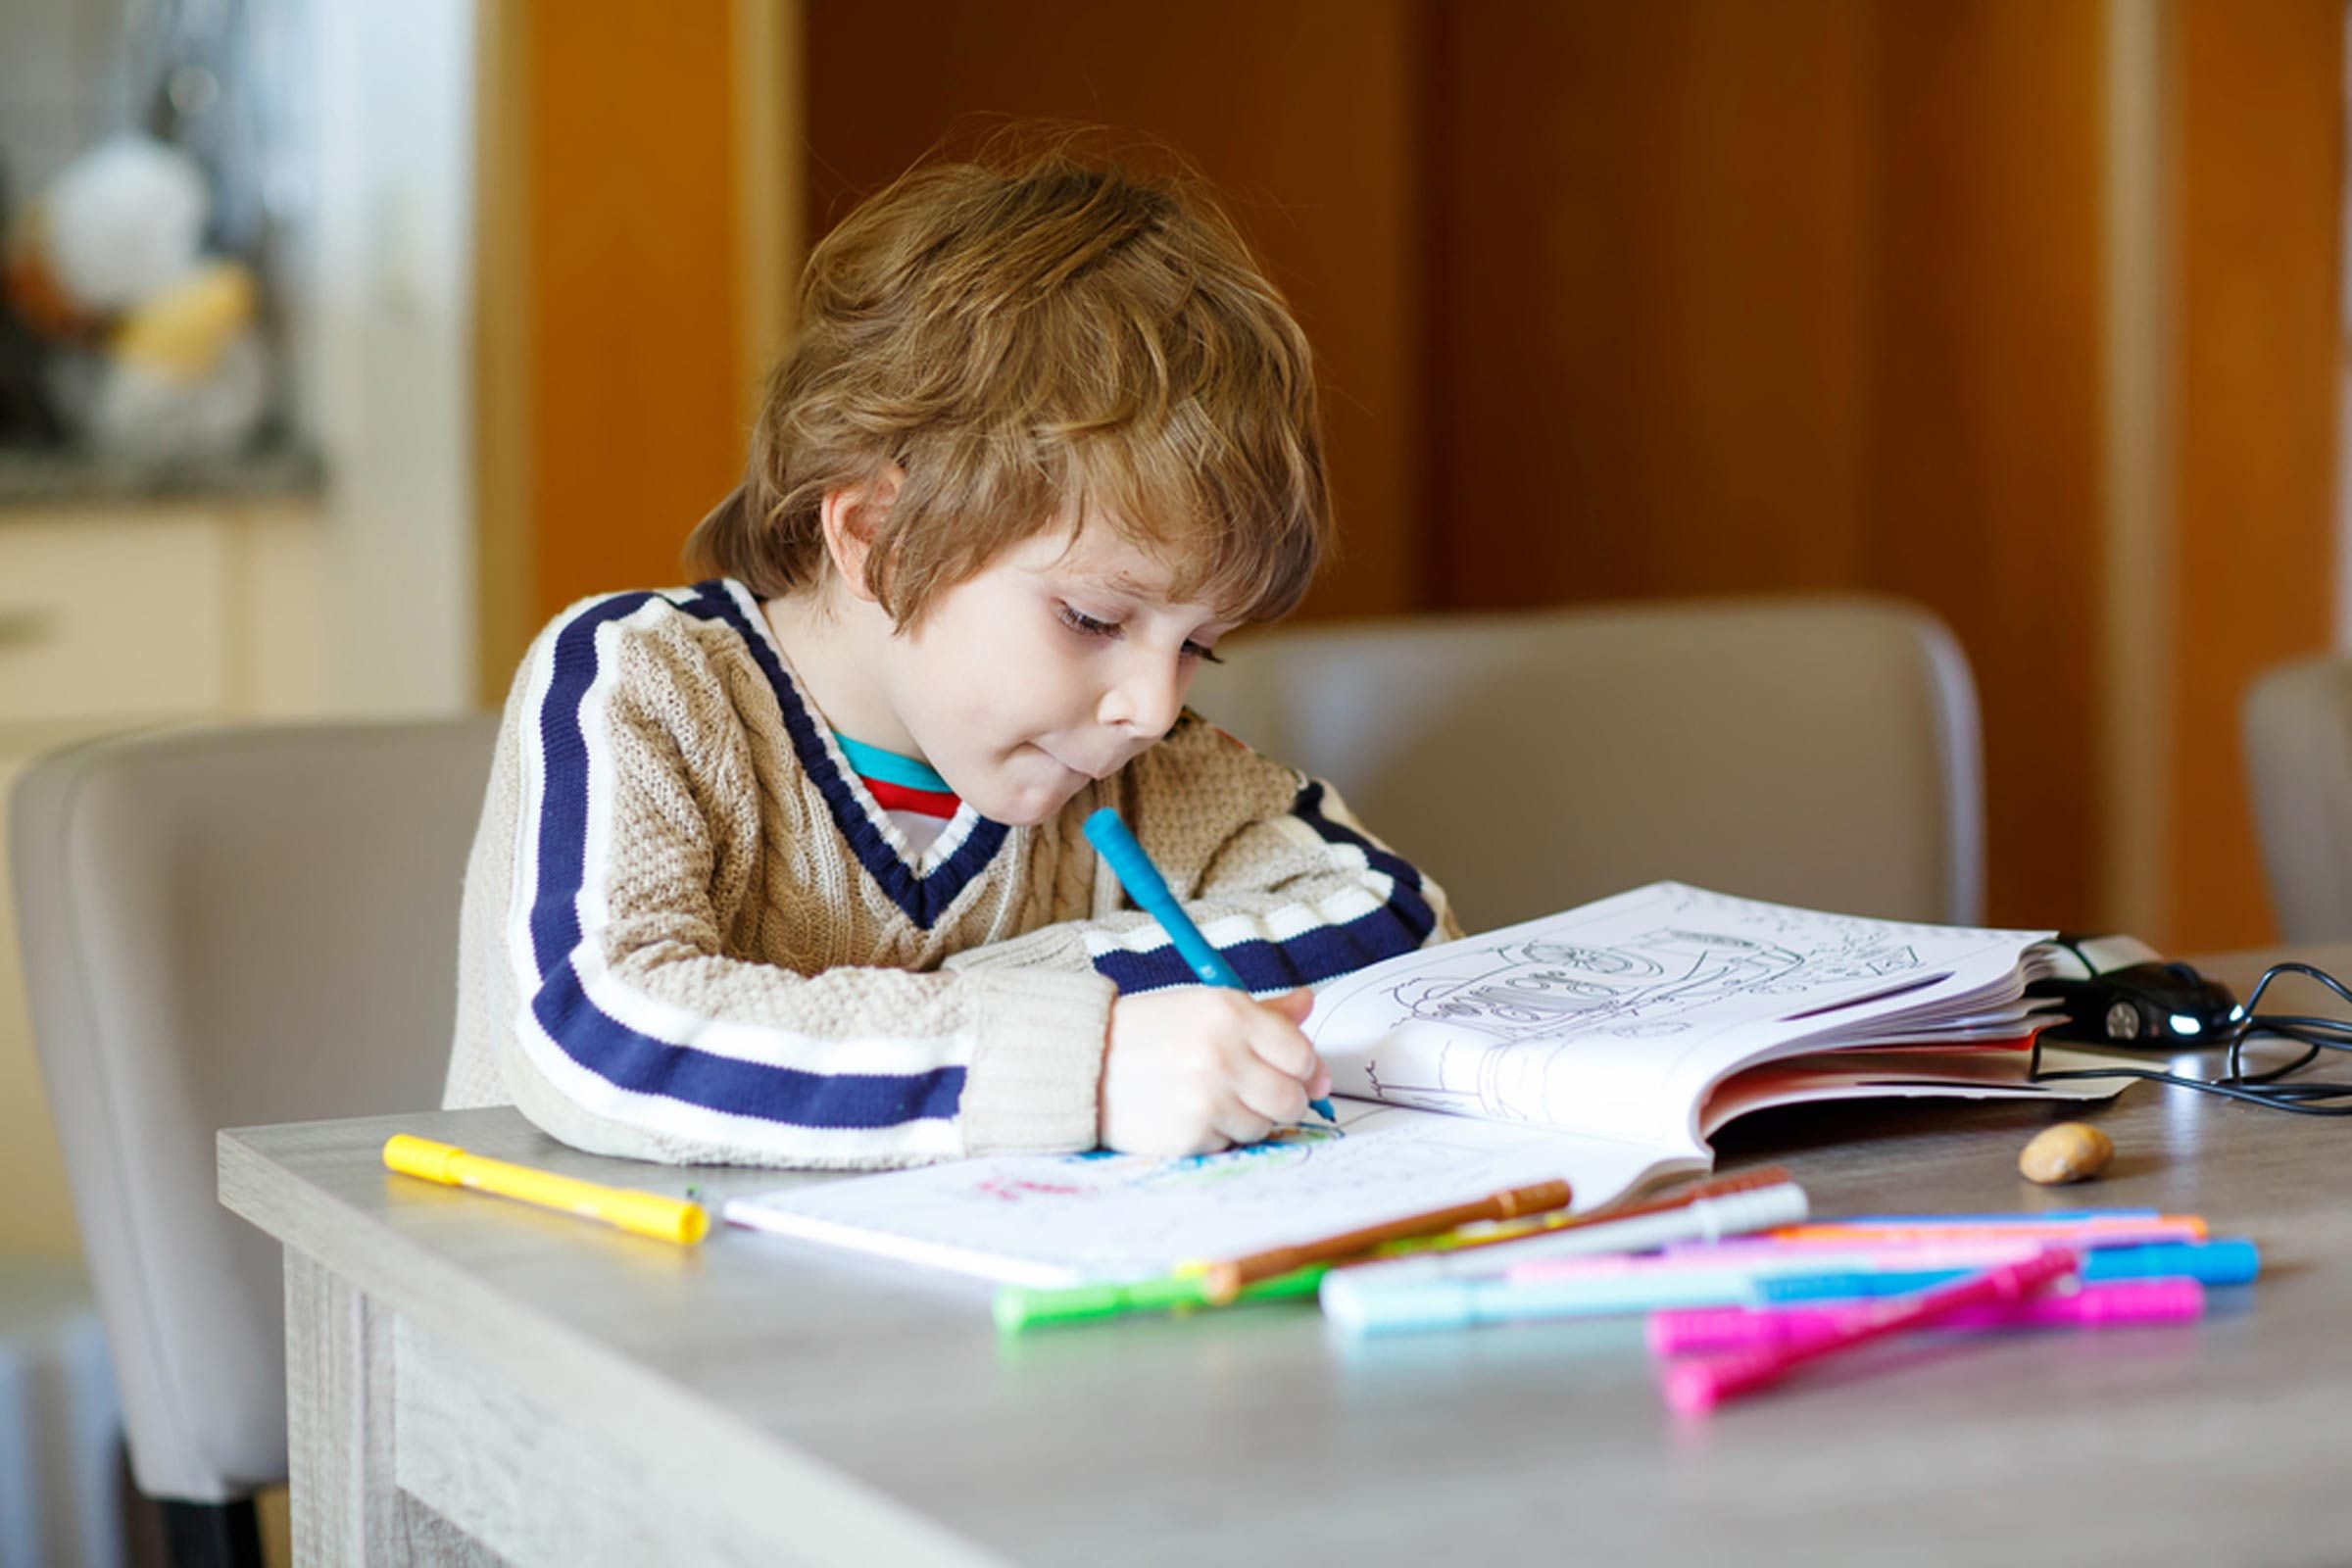 More schools are nixing homework because parents say it’s annoying